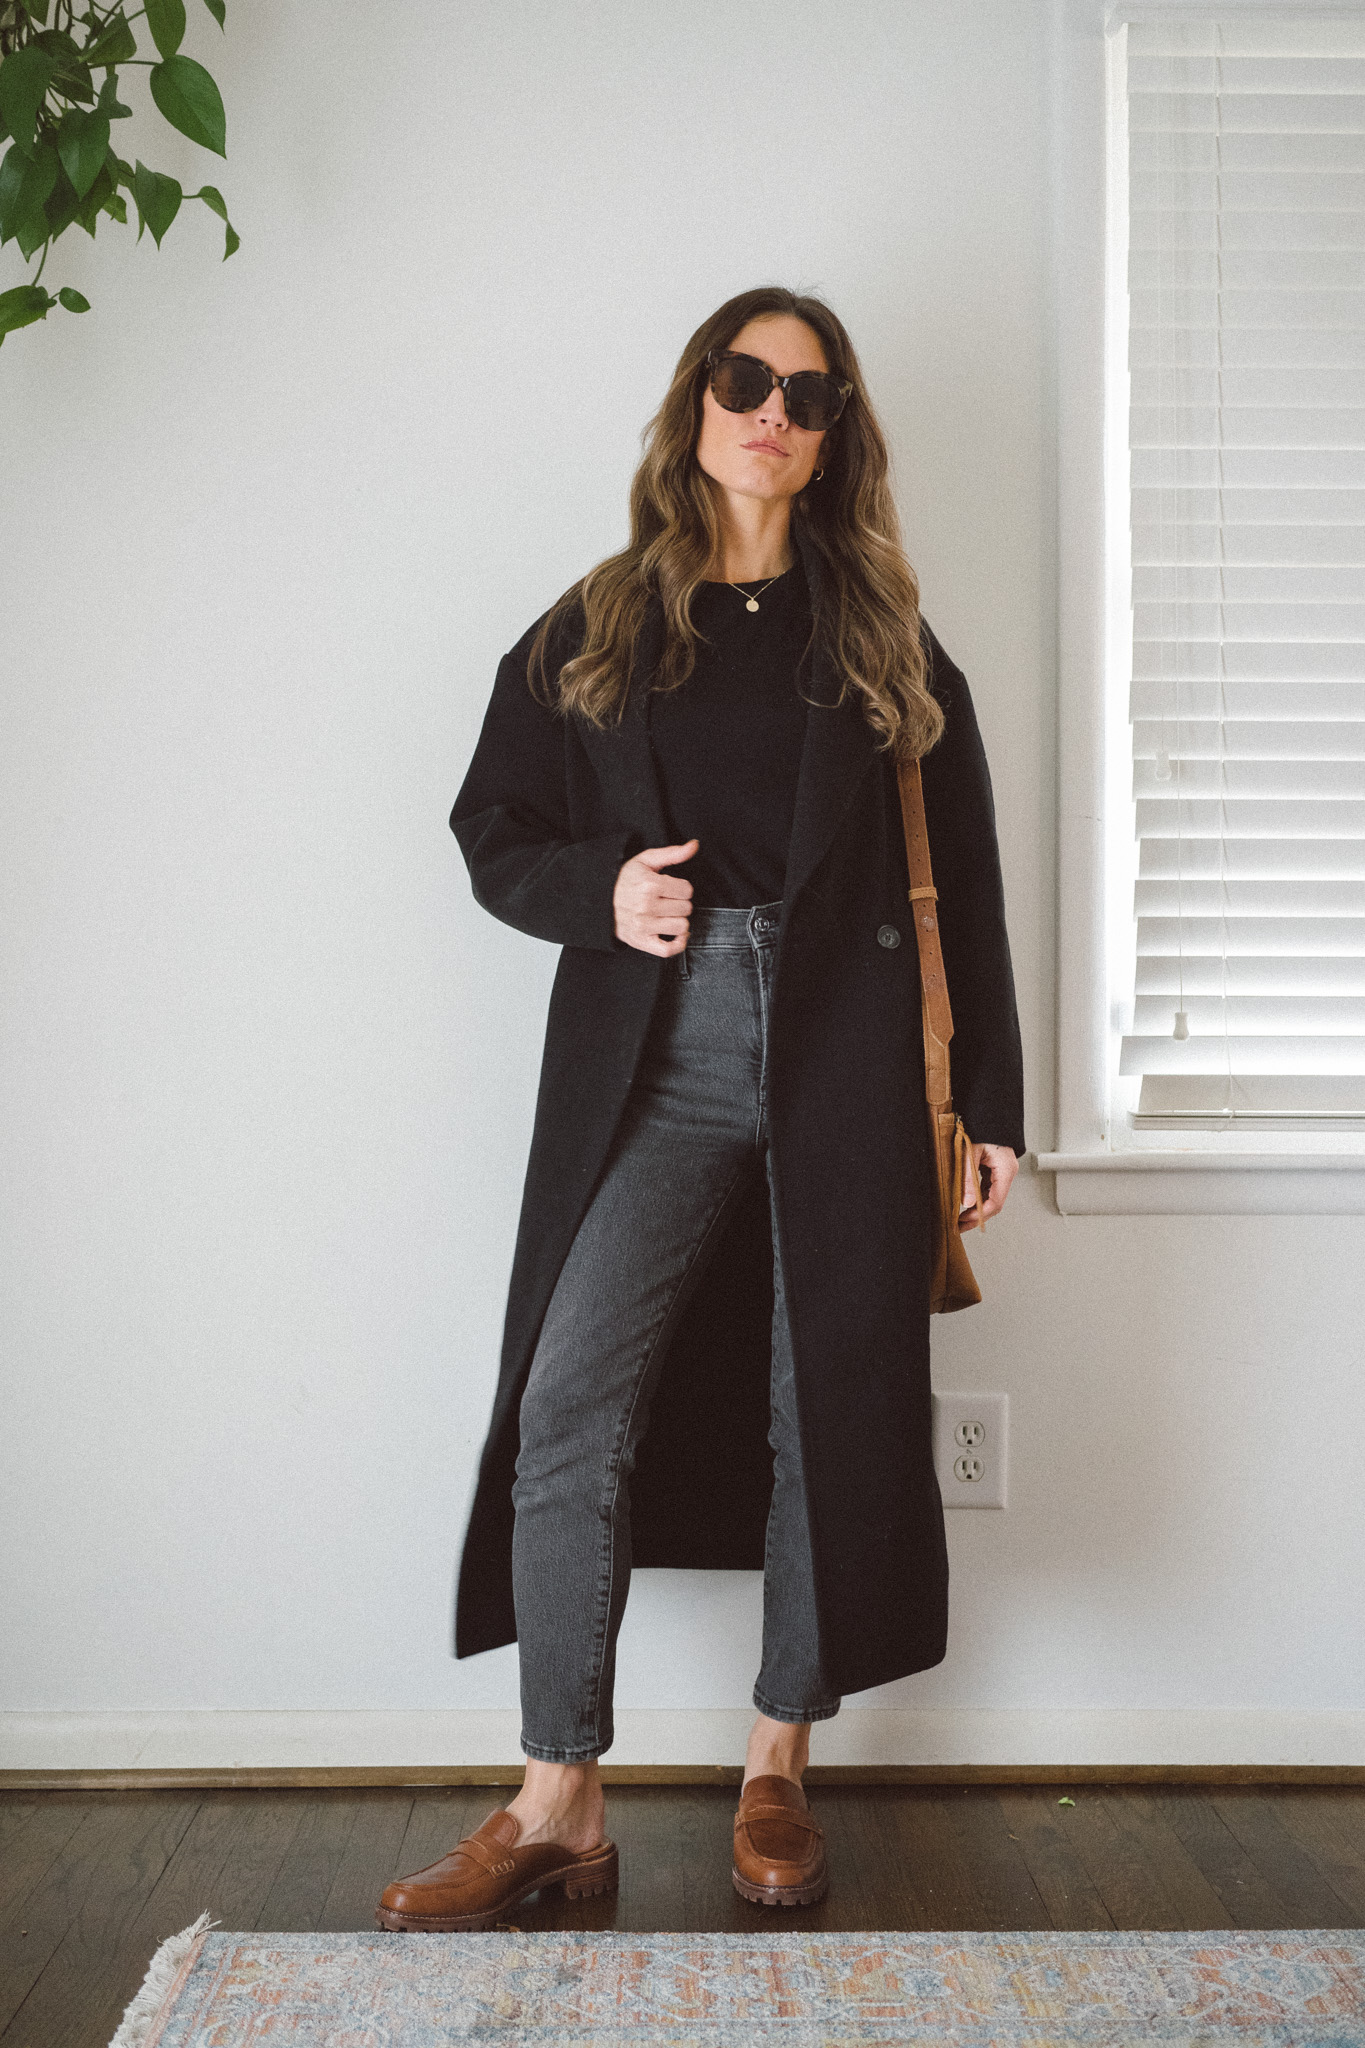 Simplifying Winter Travel: Winter Outfit Ideas for Minimalist